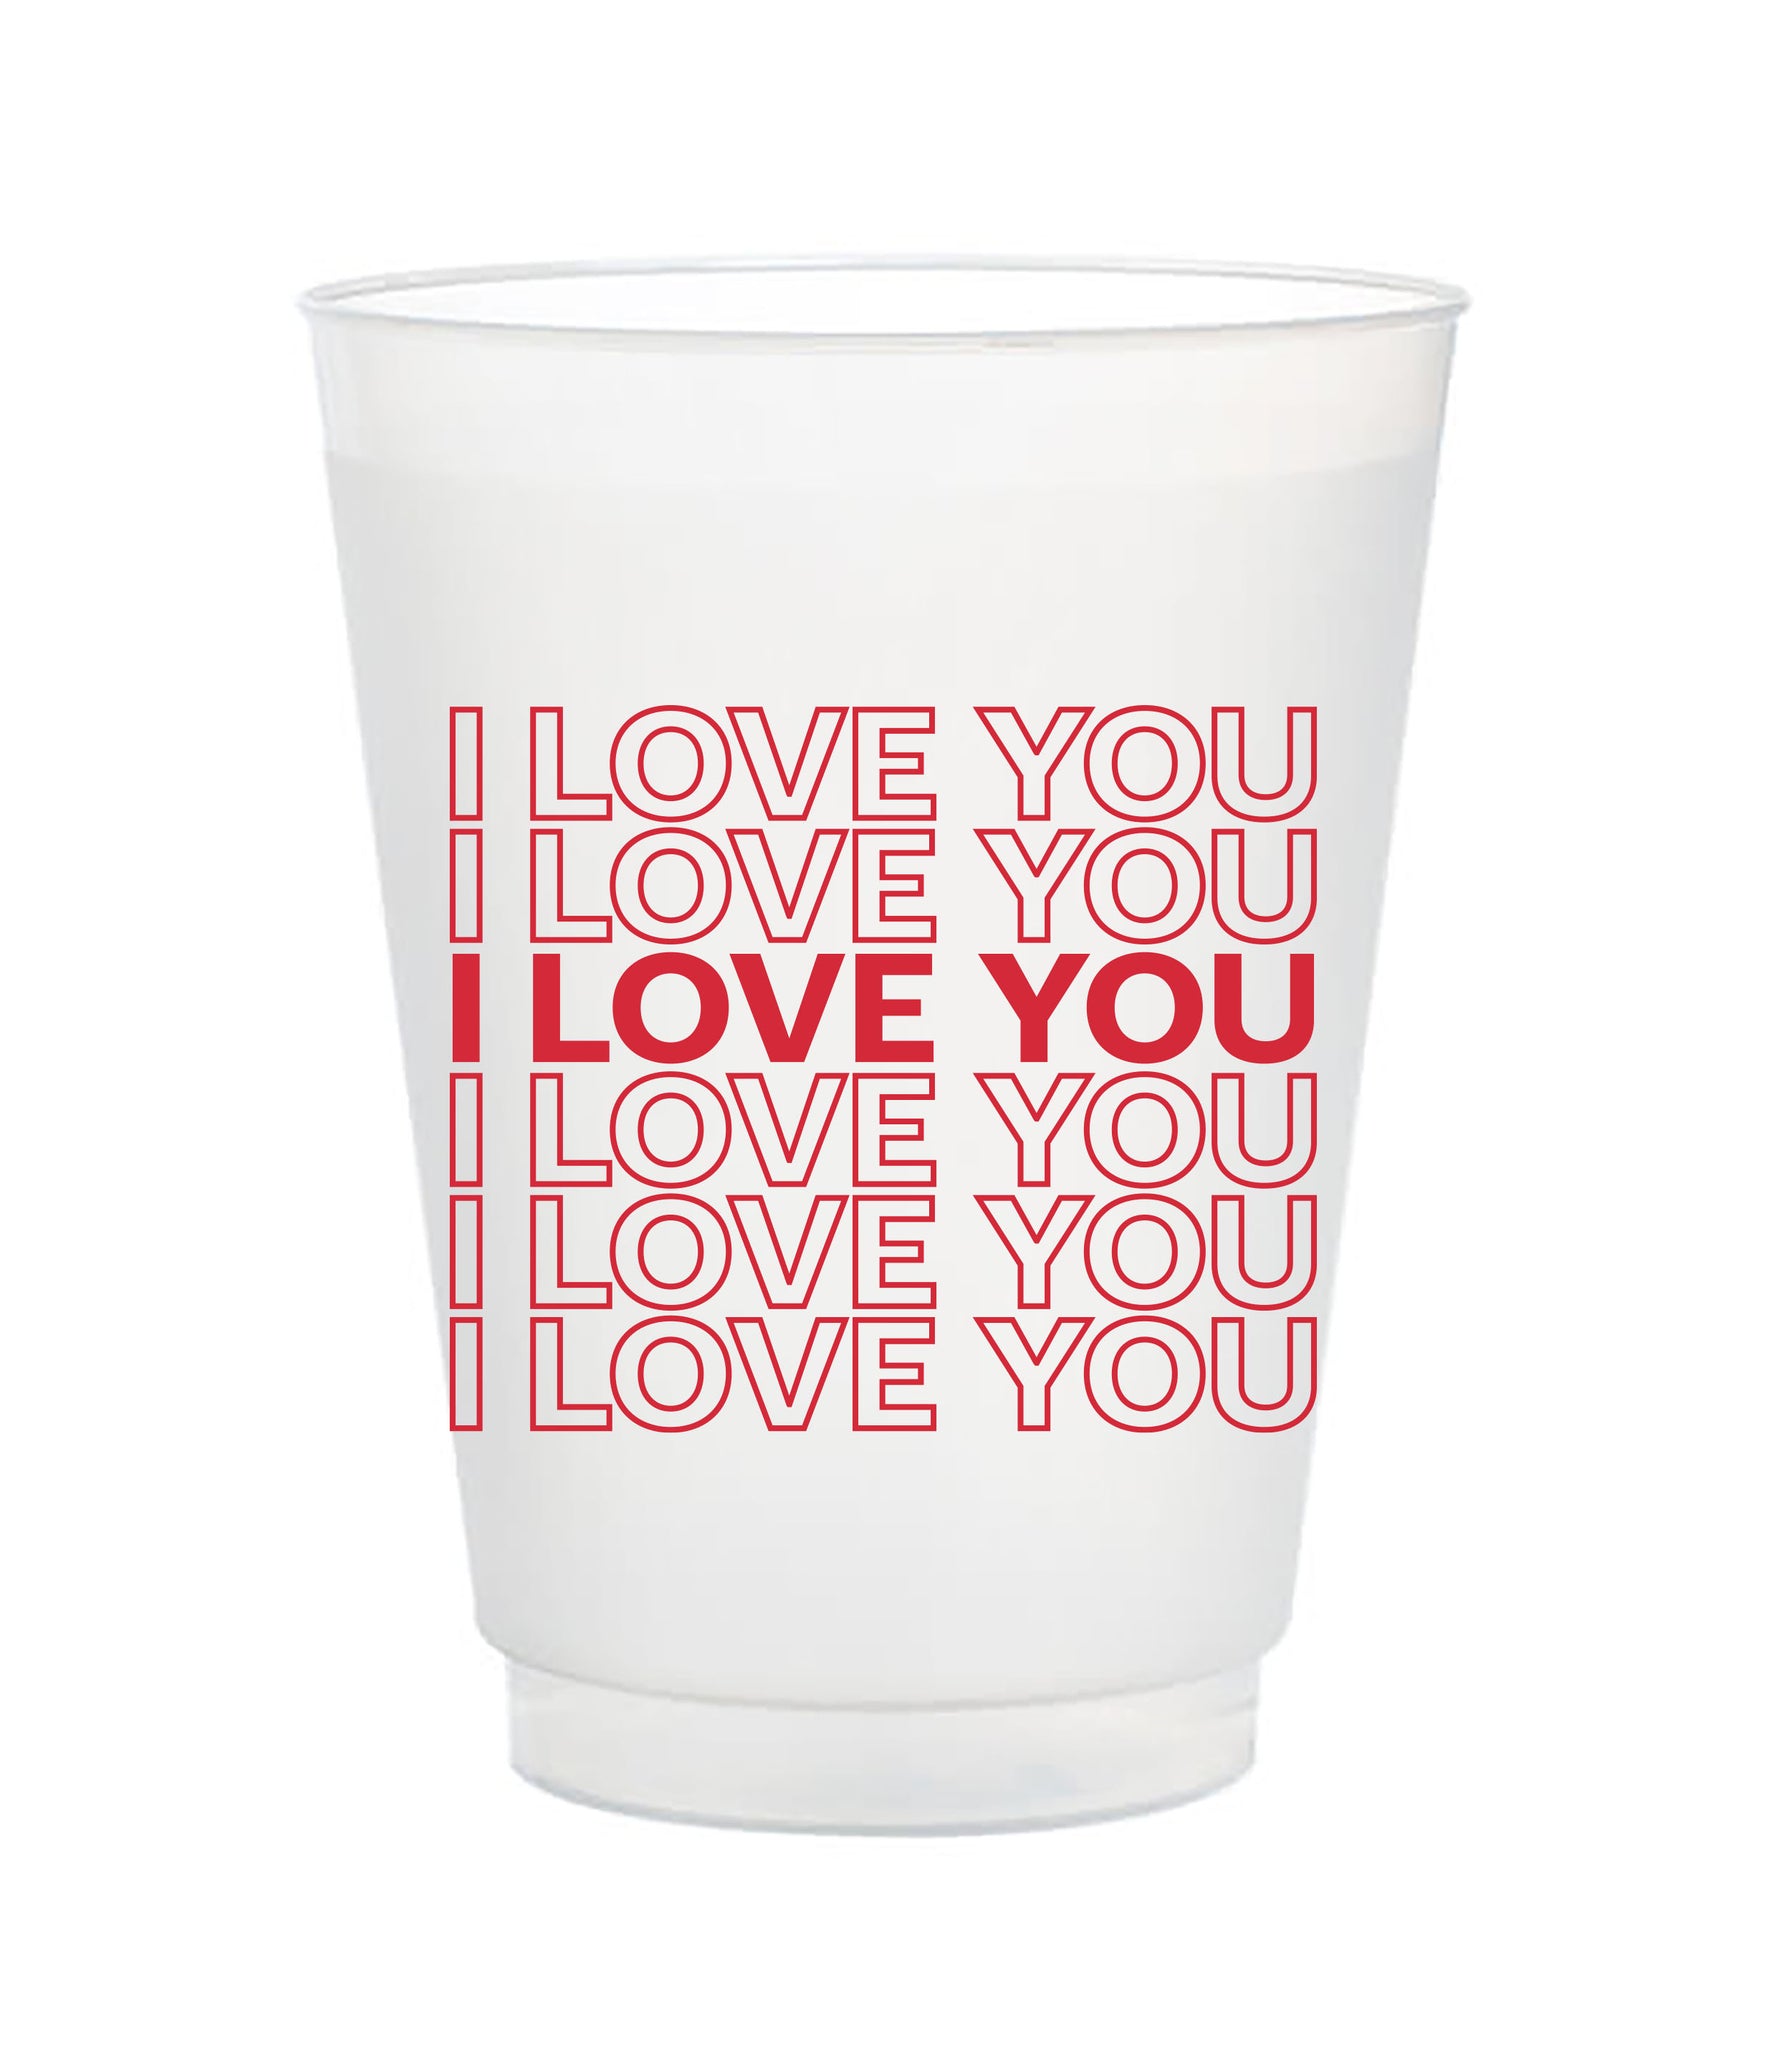 i love you cups